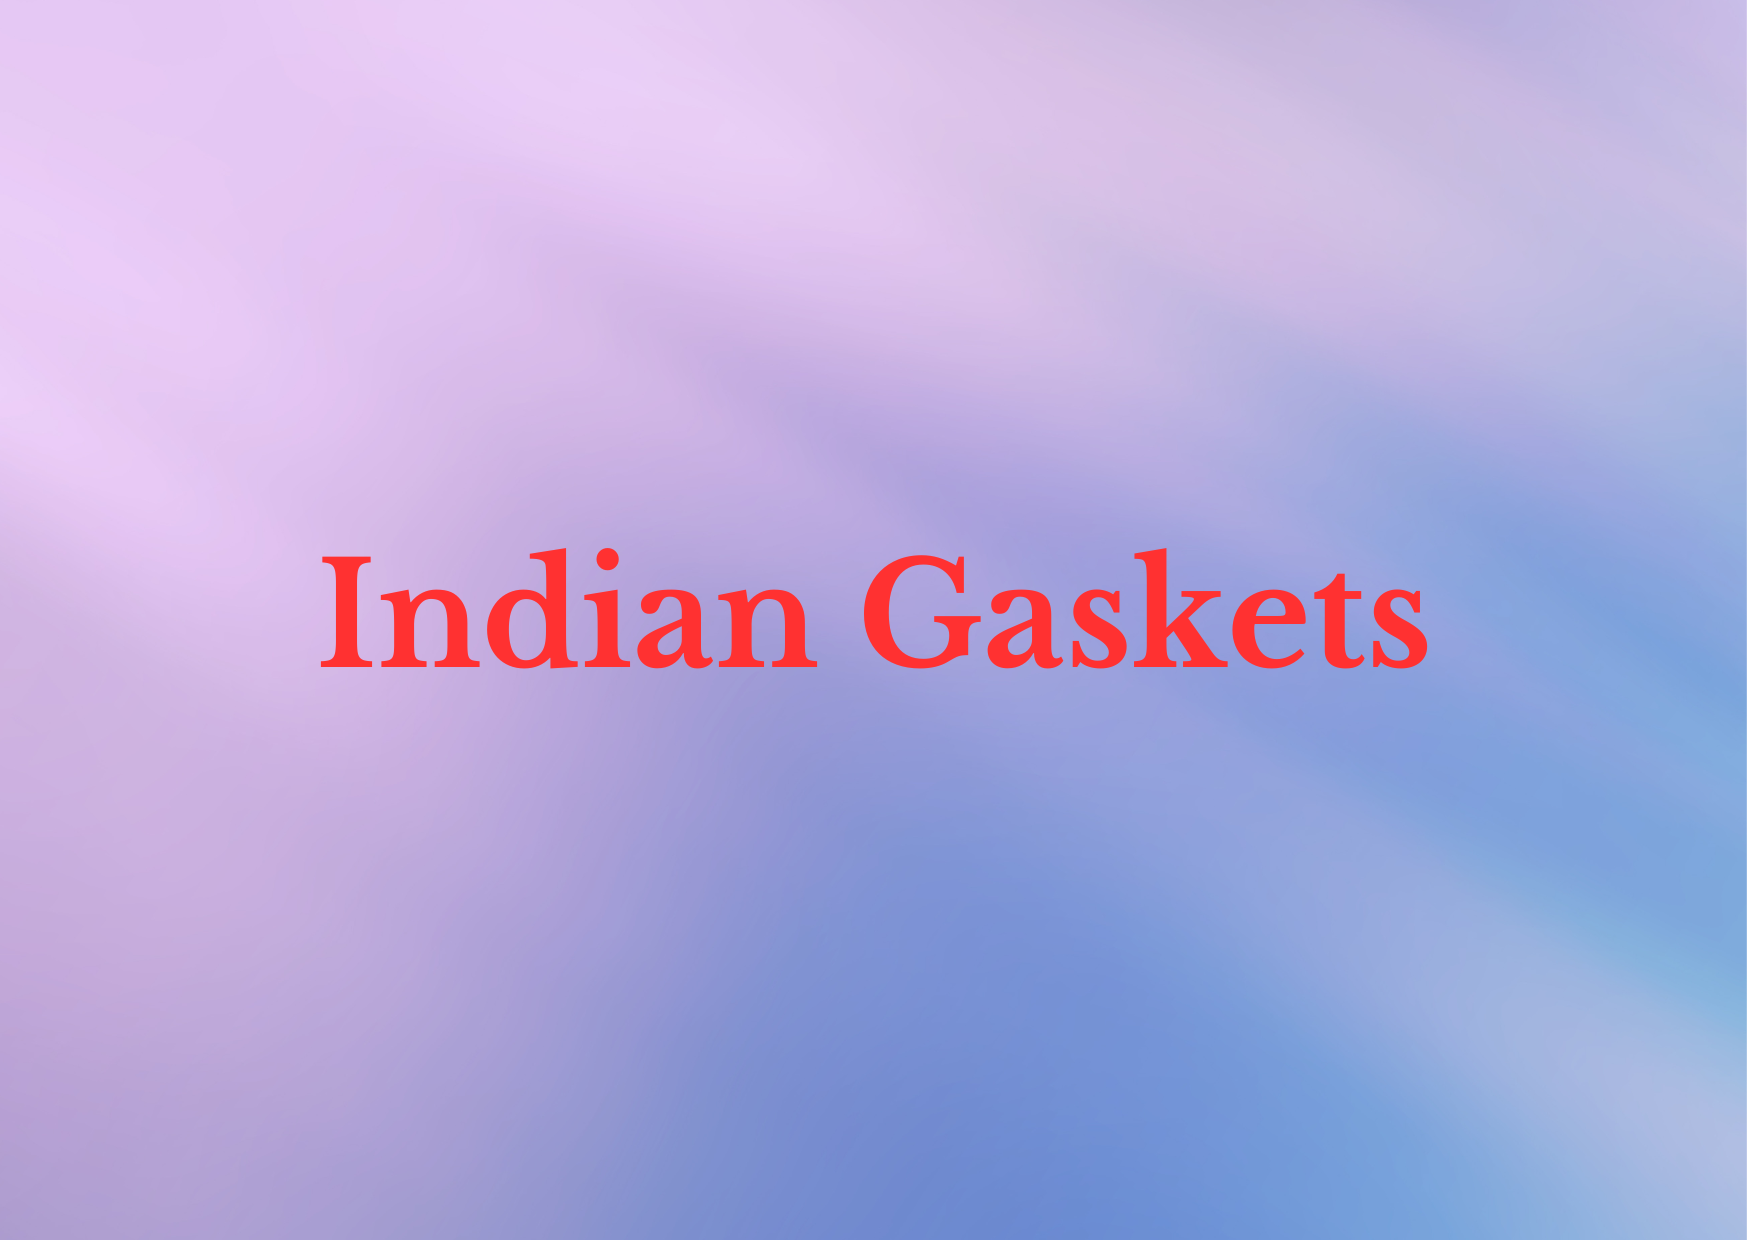 Indian Gaskets,   